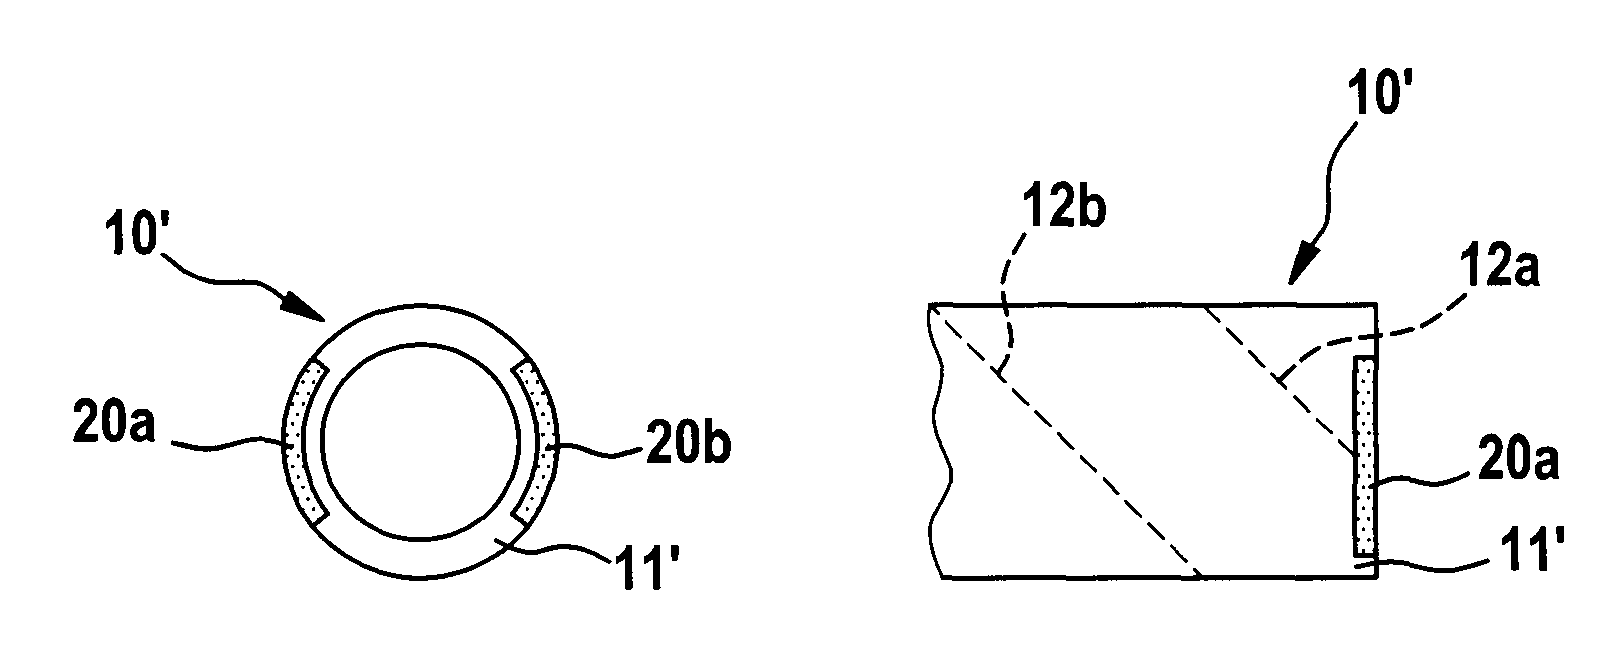 Device for insertion of electrode lines or other medical instruments into a body